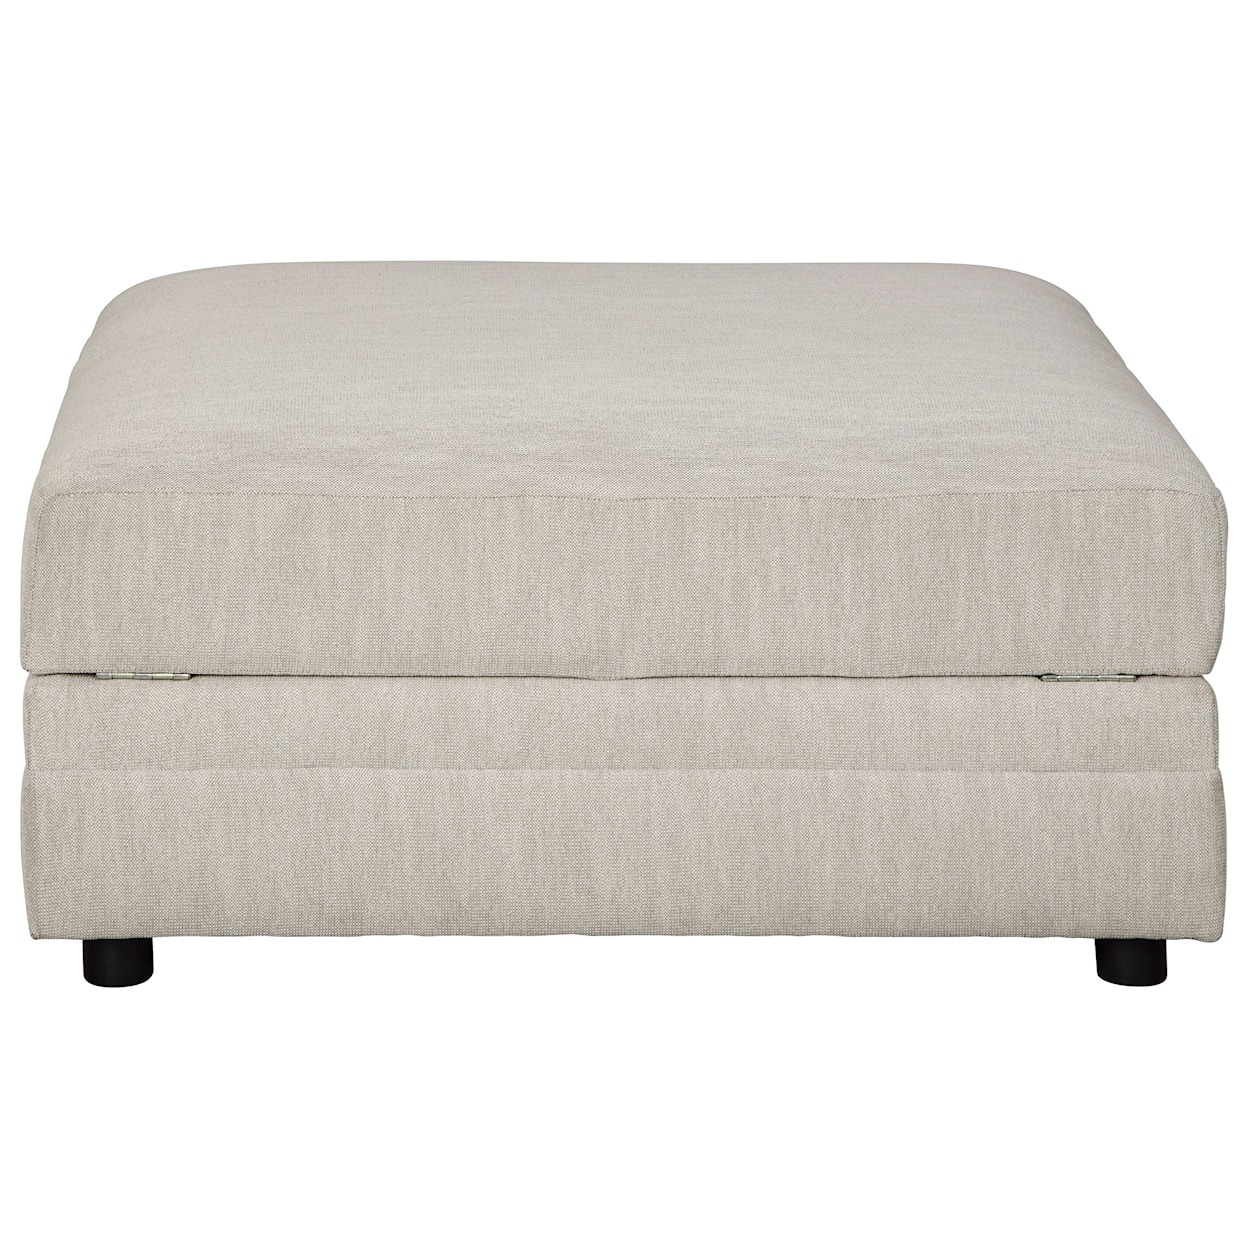 Signature Design by Ashley Furniture Neira Ottoman with Storage